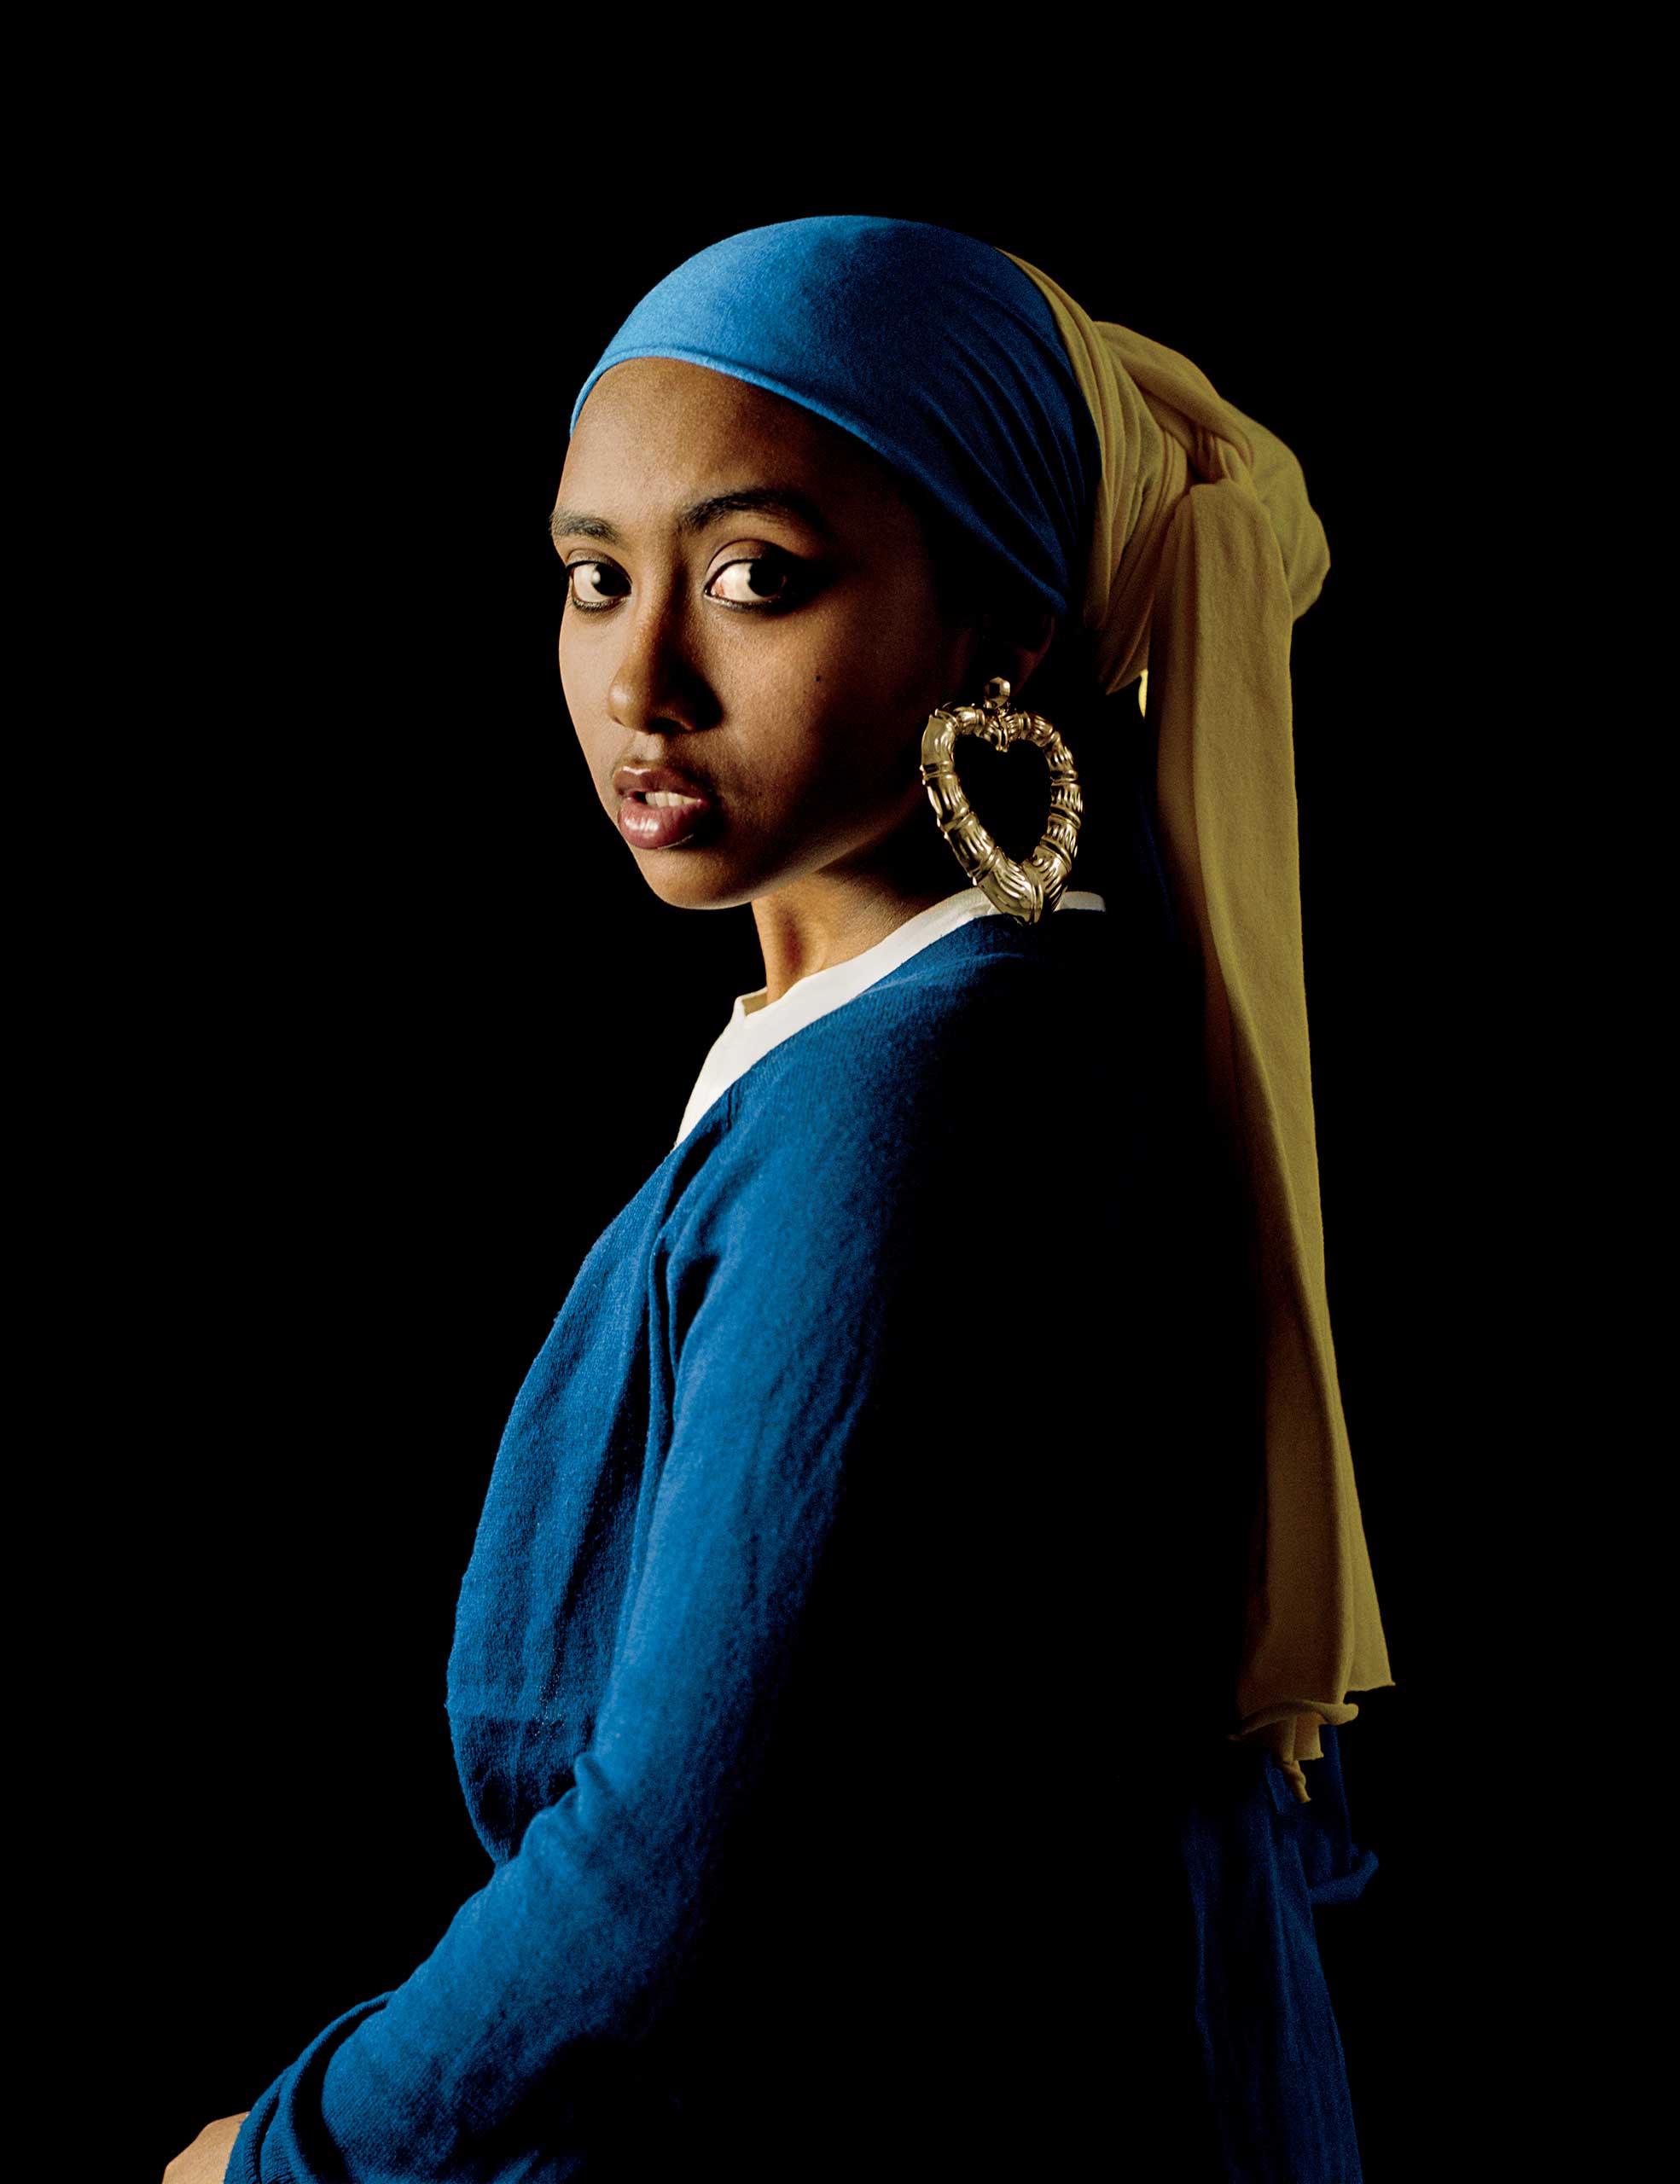 Girl with a Bamboo Earring, 2009